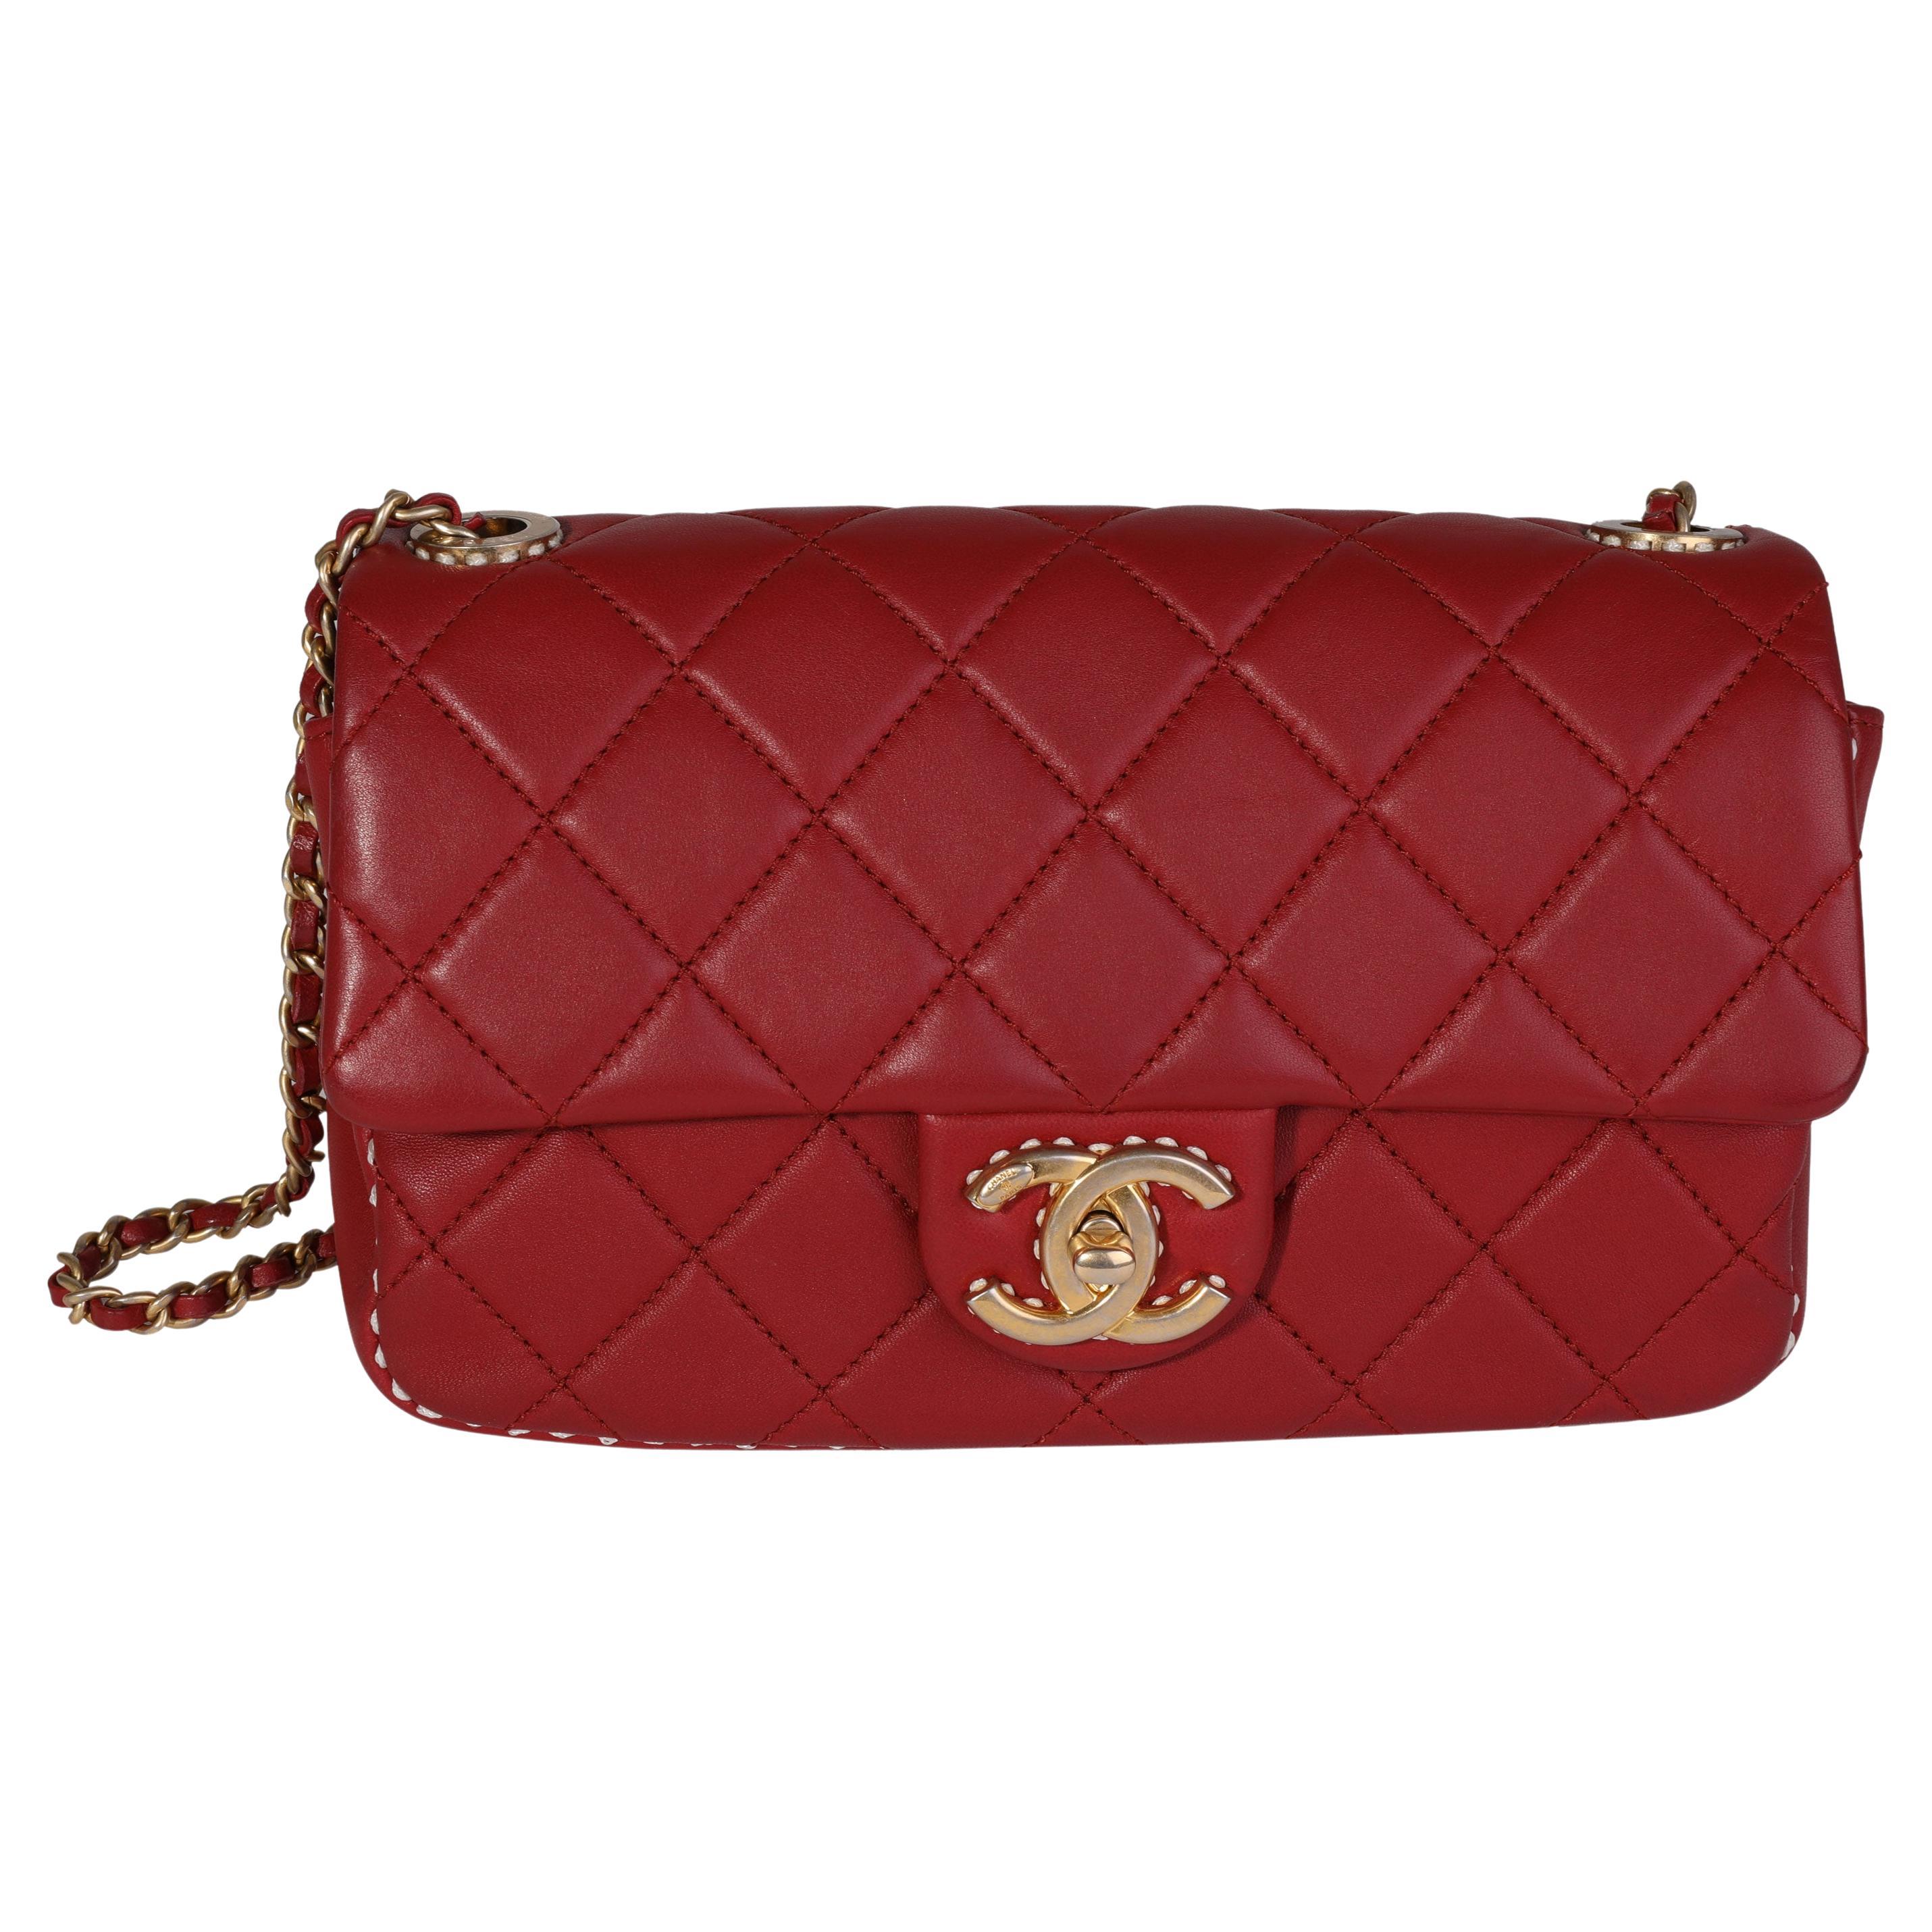 Chanel Red Quilted Lambskin Small Stitched Single Flap Bag